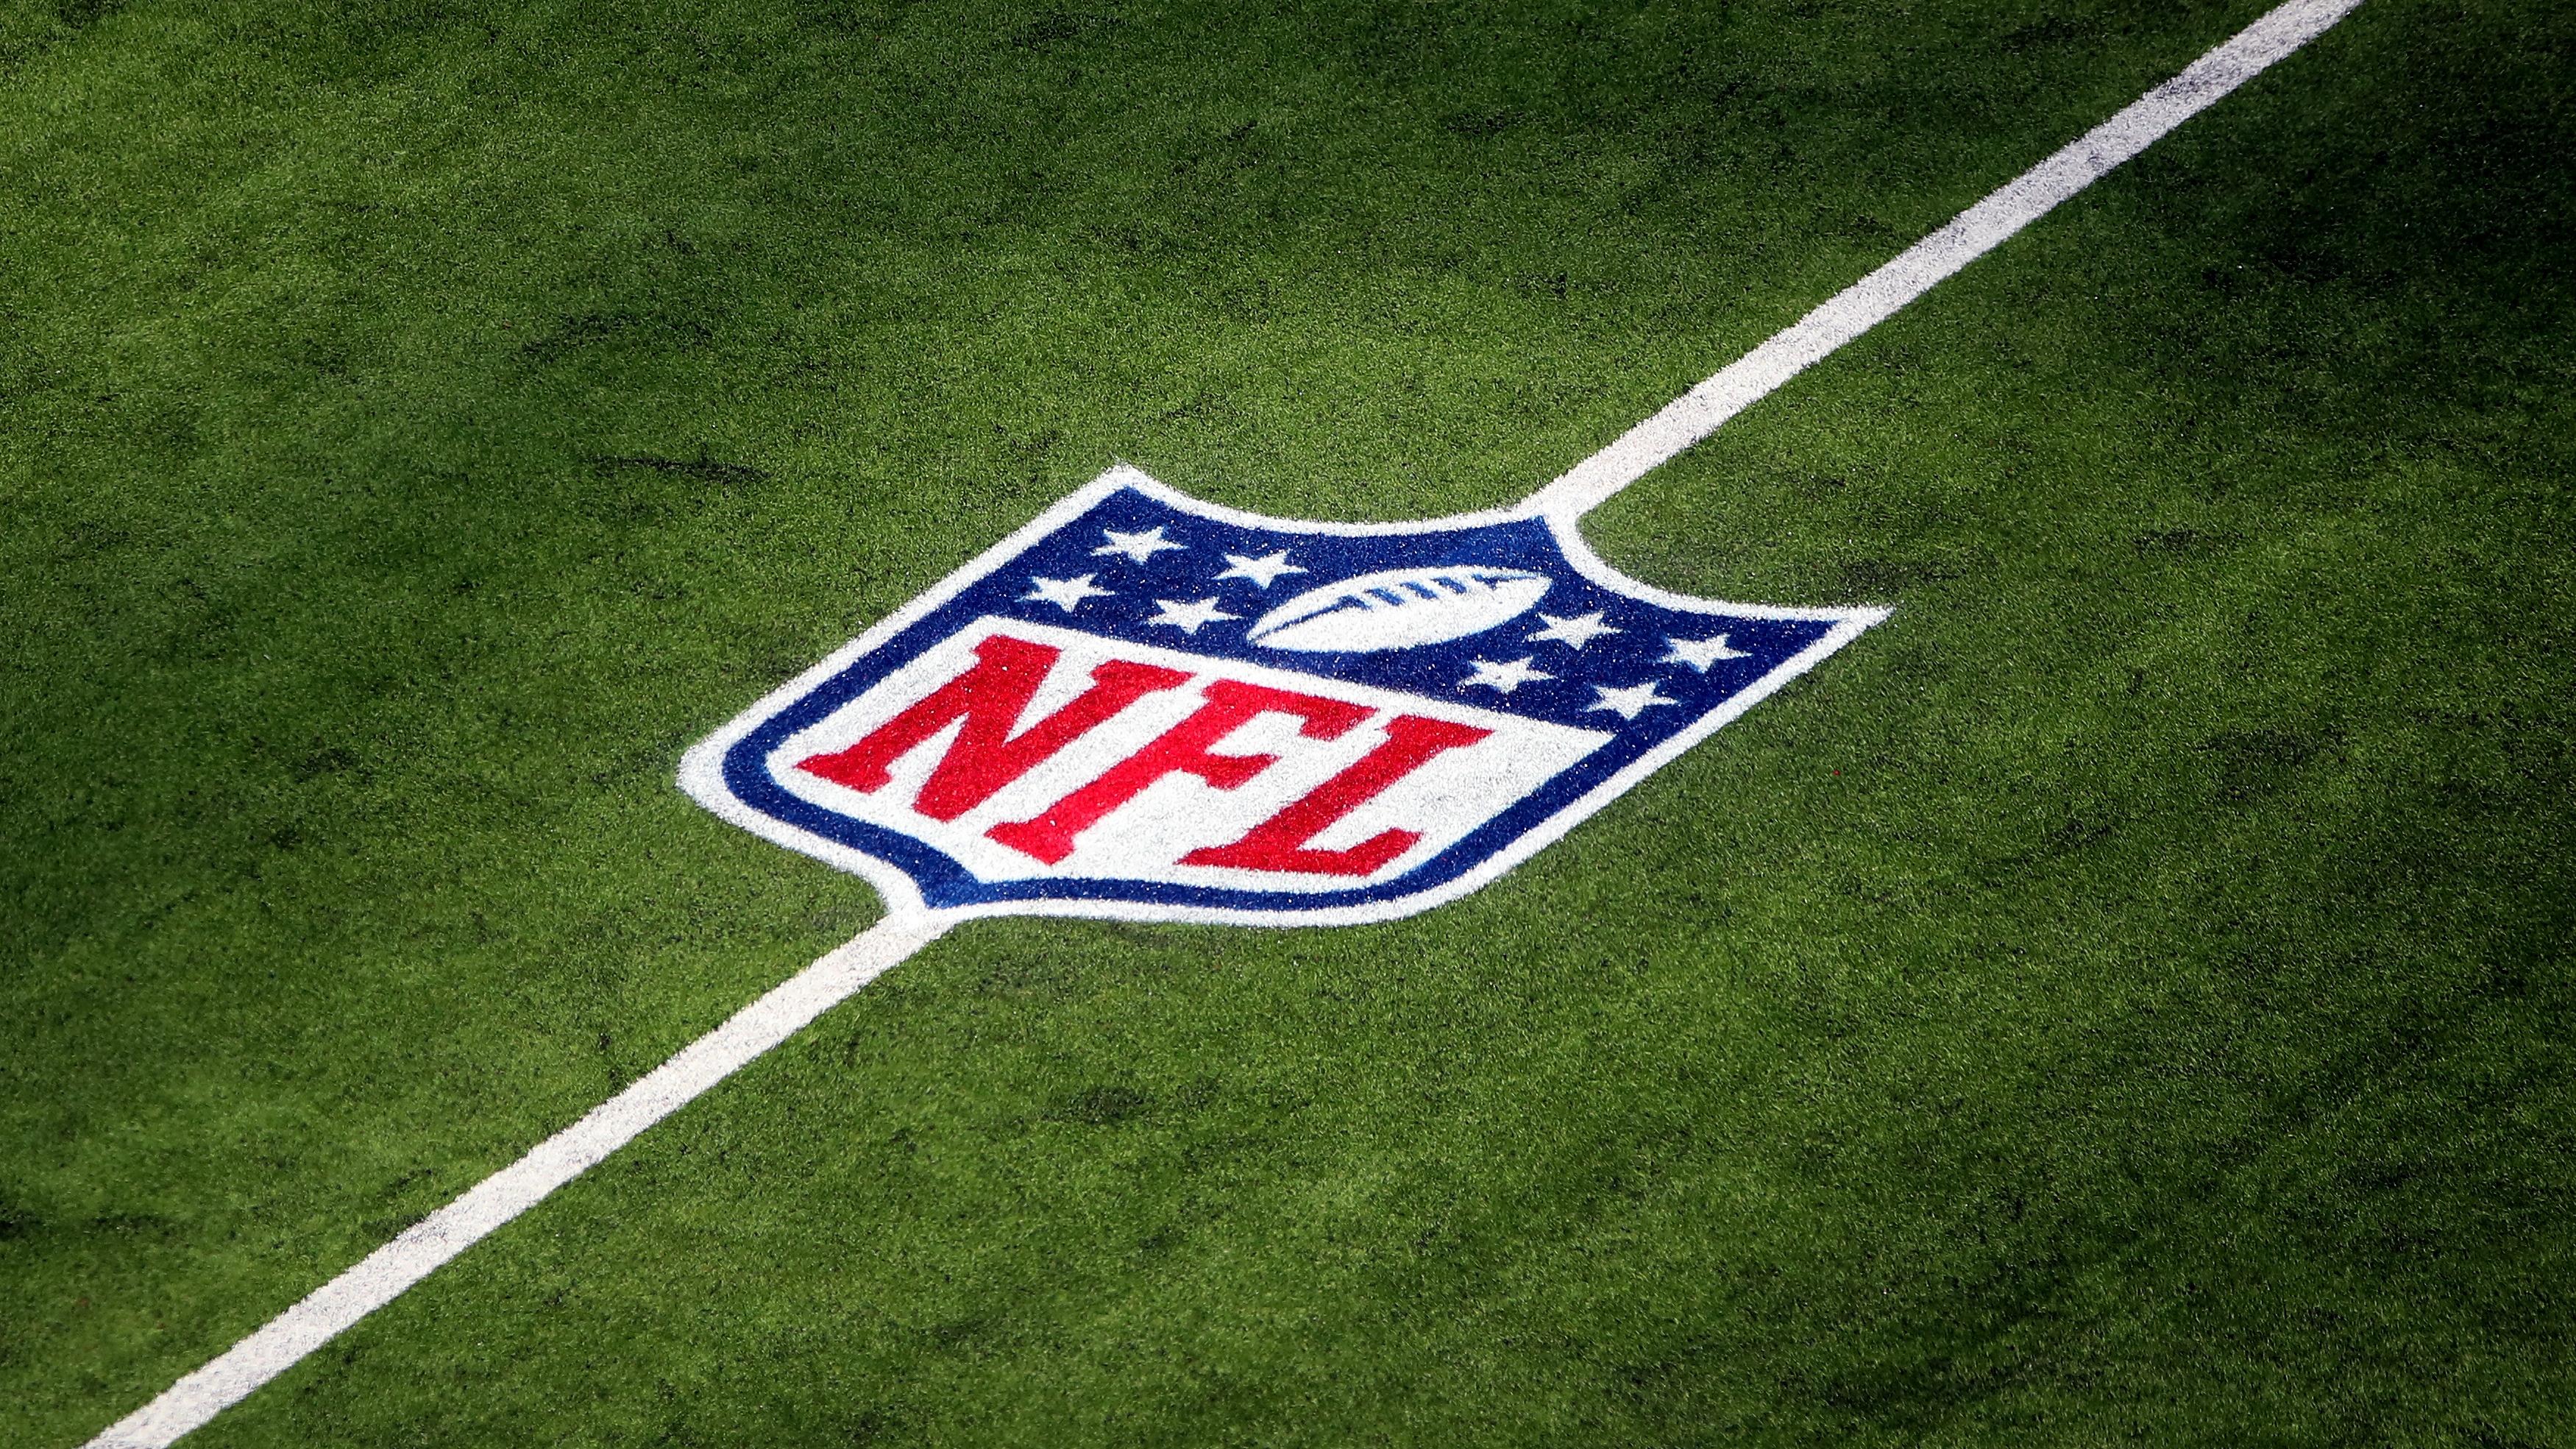 DirecTV purchase could hinge on NFL Sunday Ticket renewal - NBC Sports